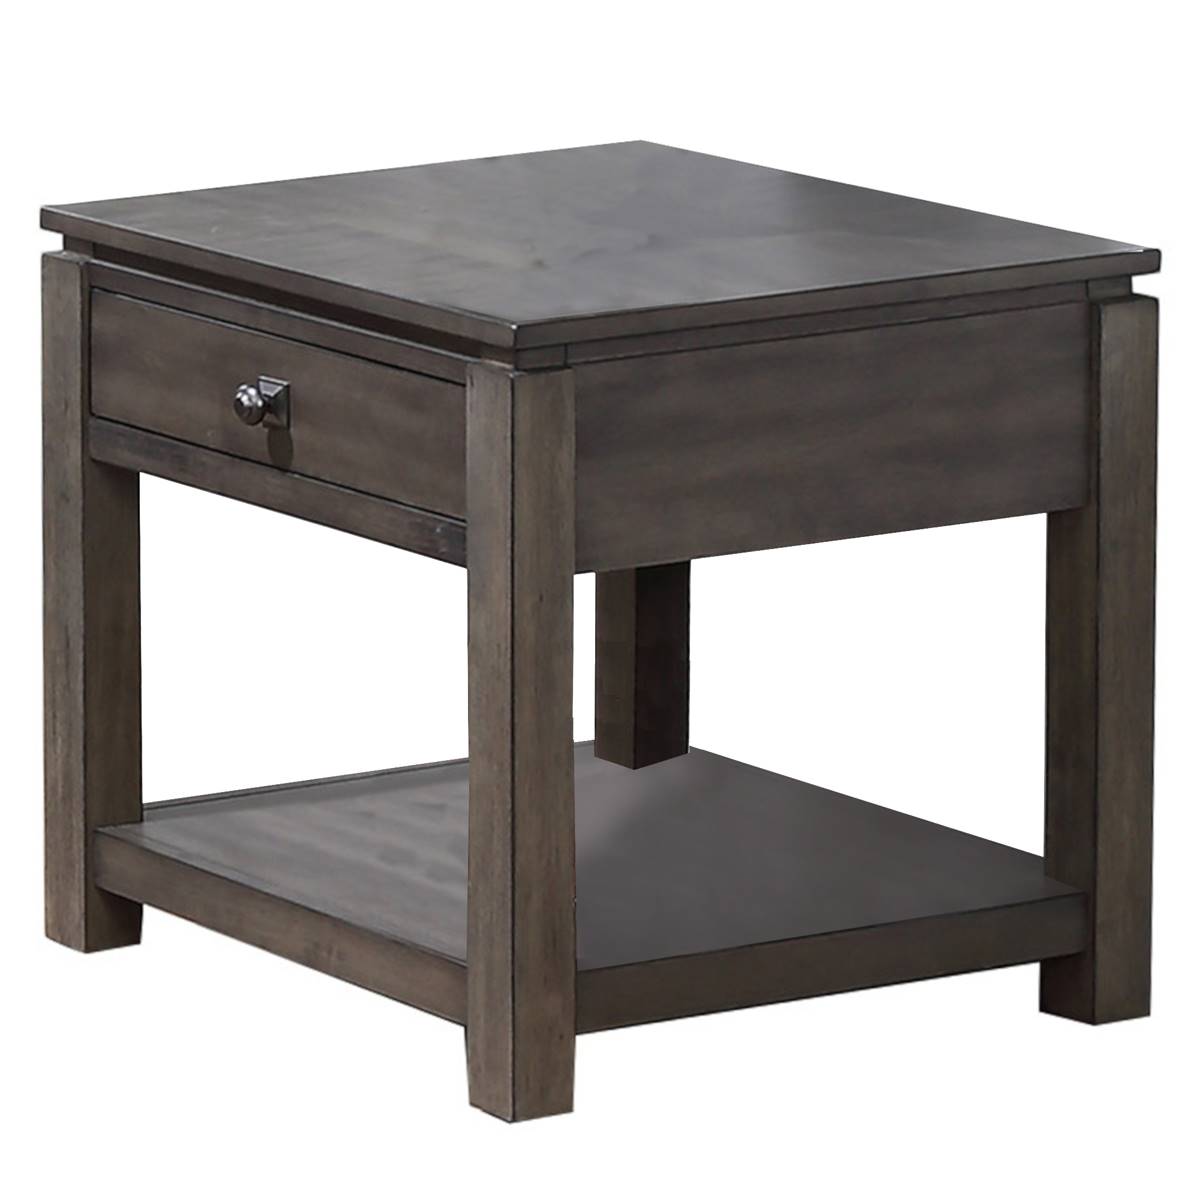 Besthom Weathered Square Solid Wood End Table With 1 Drawer